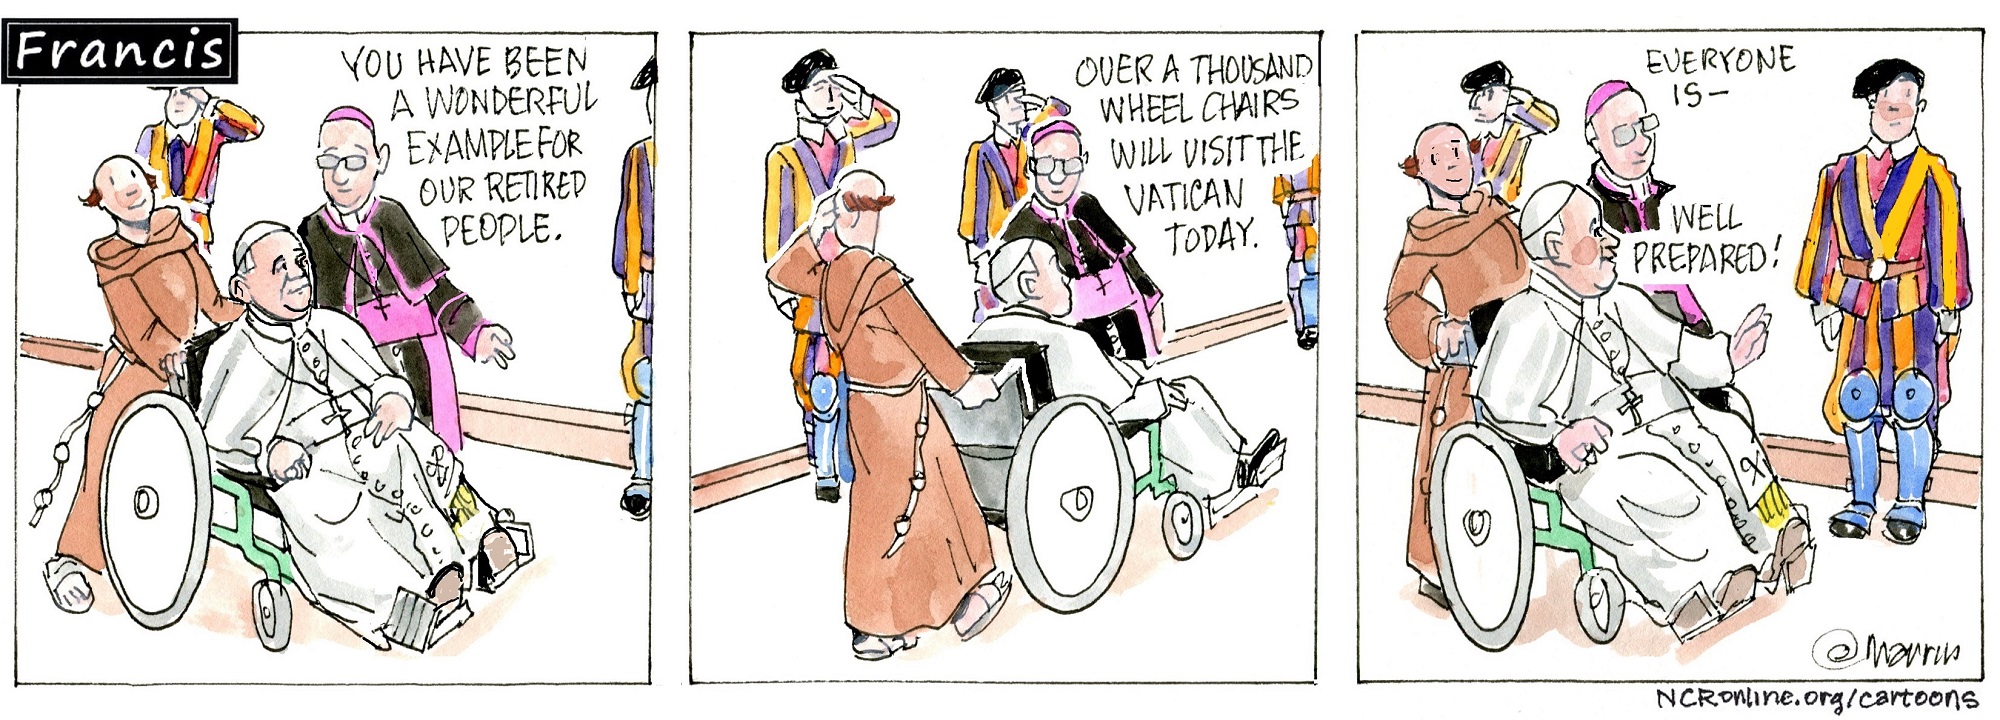 Francis, the comic strip: Francis has been a wonderful example.